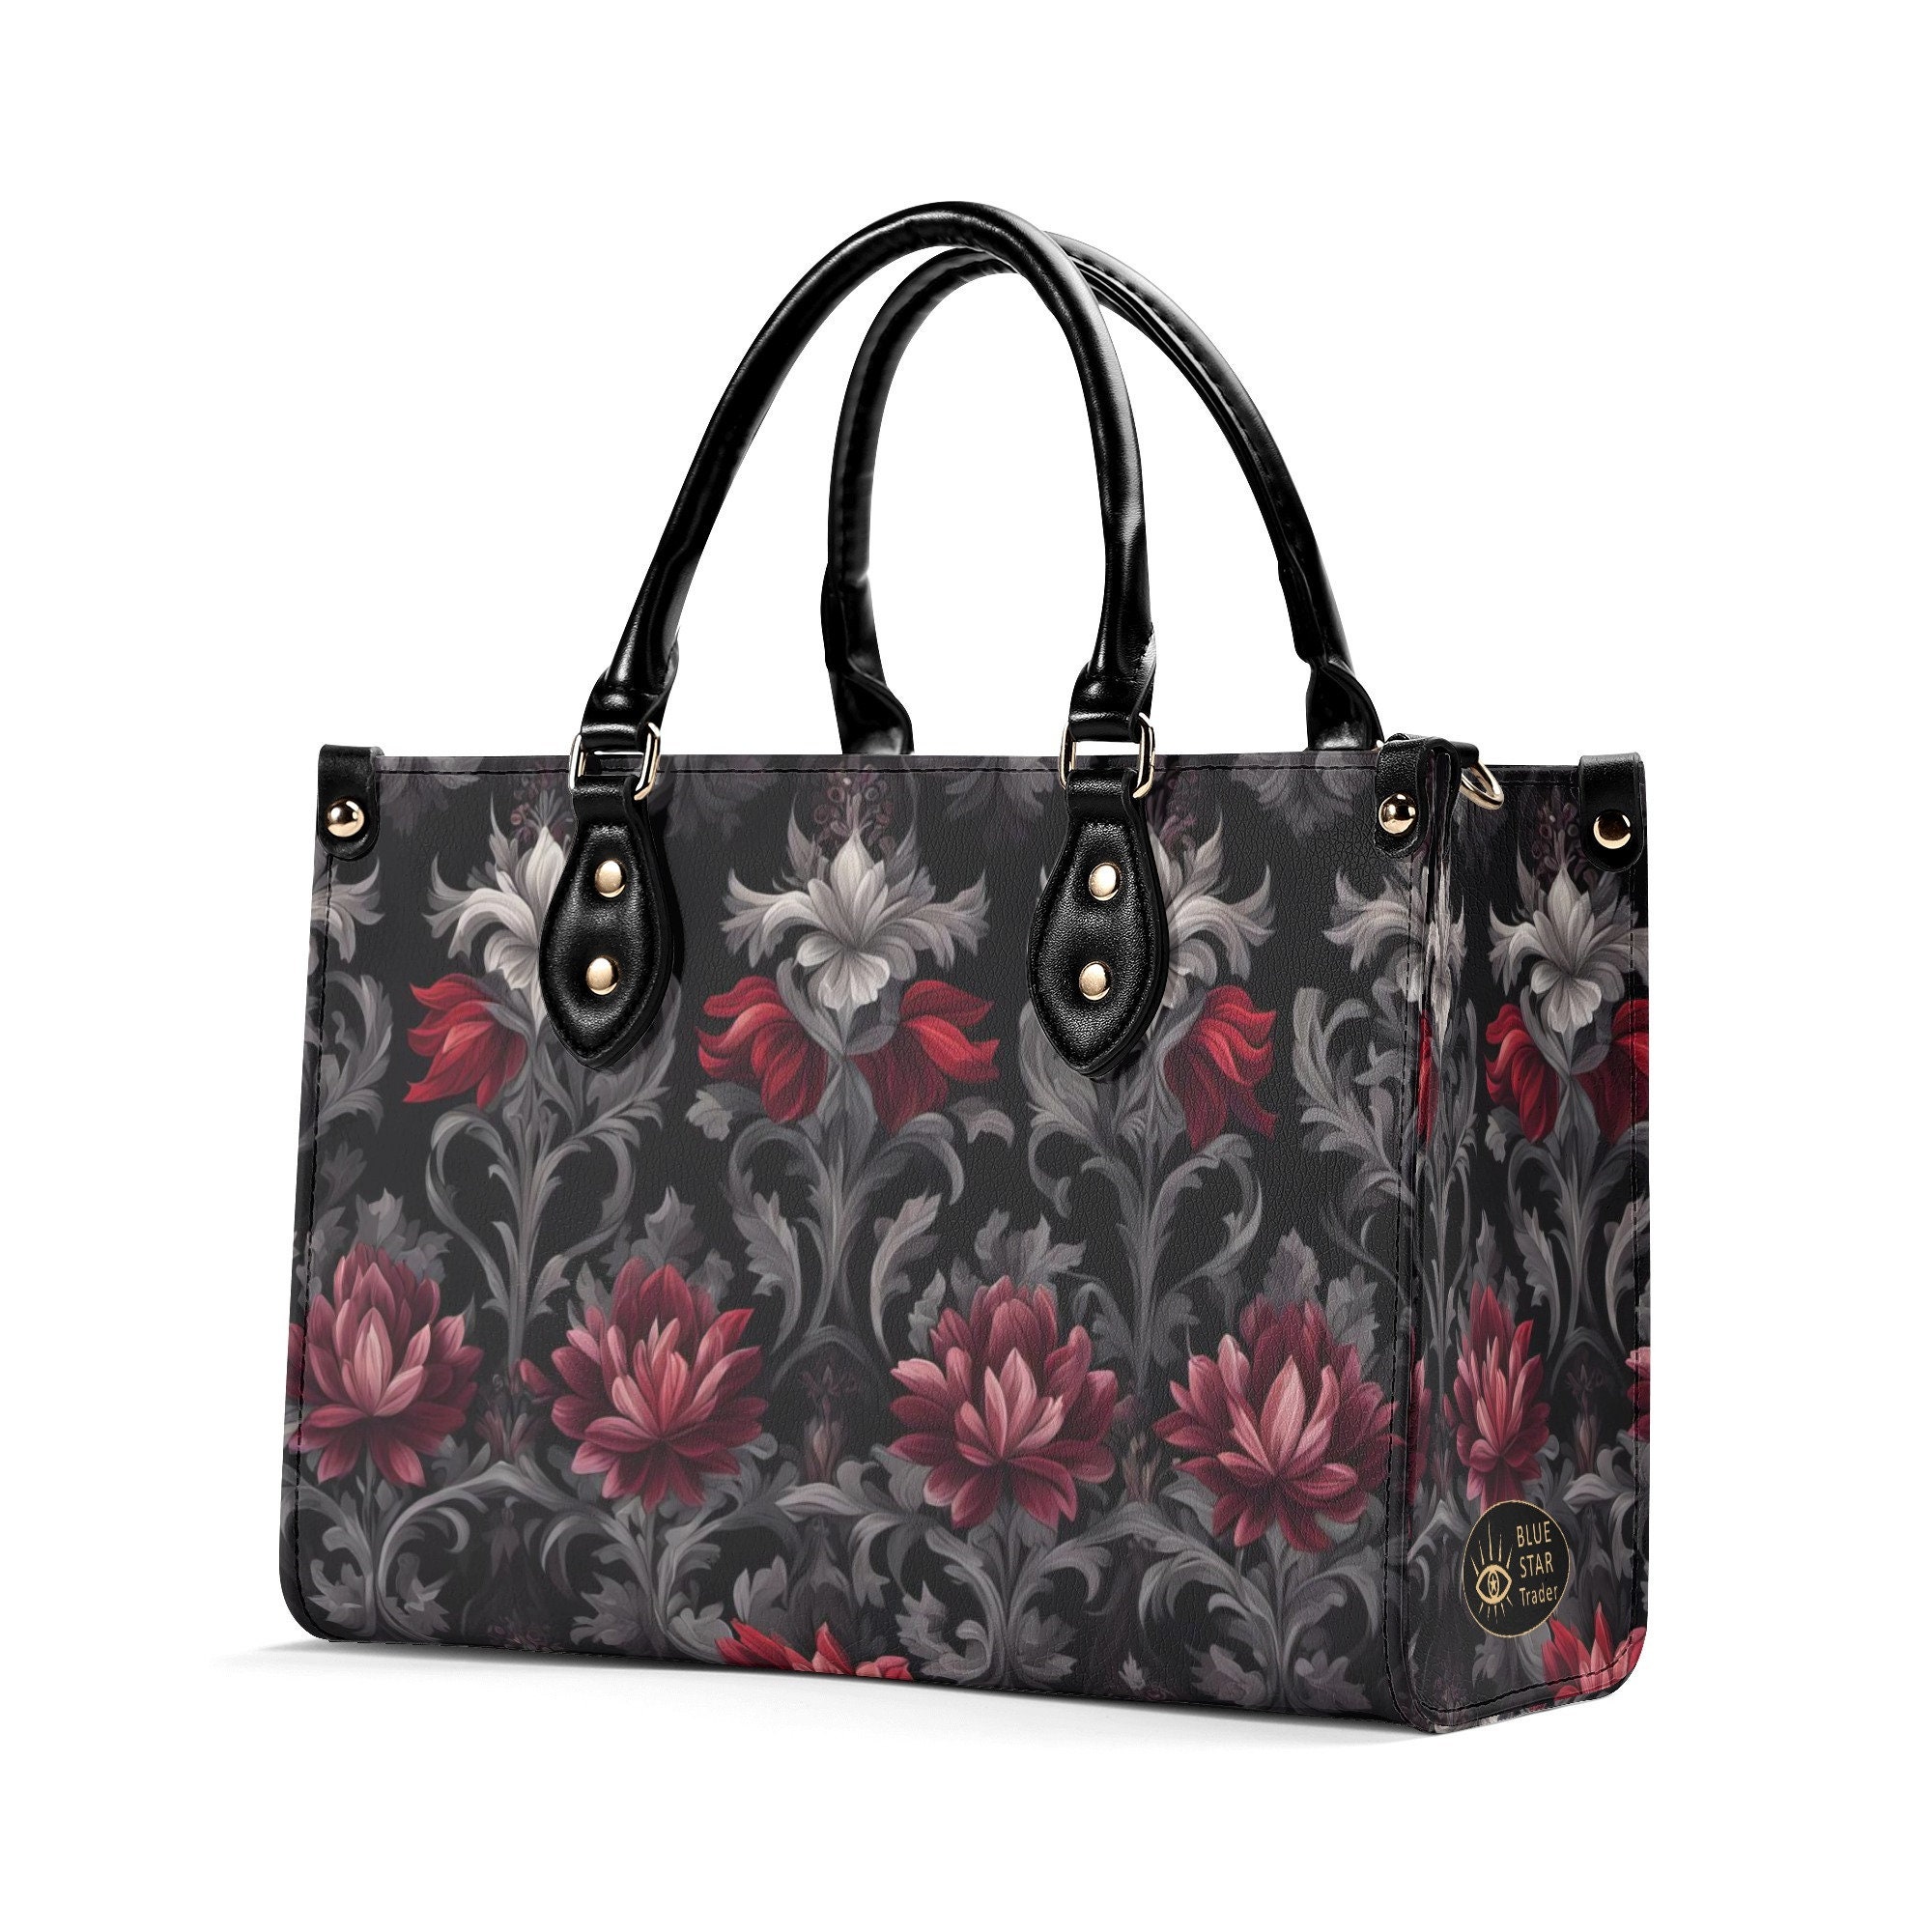 Midnight Peony - Goth Red Flowers Purse, Floral Faux Leather Hand BaG